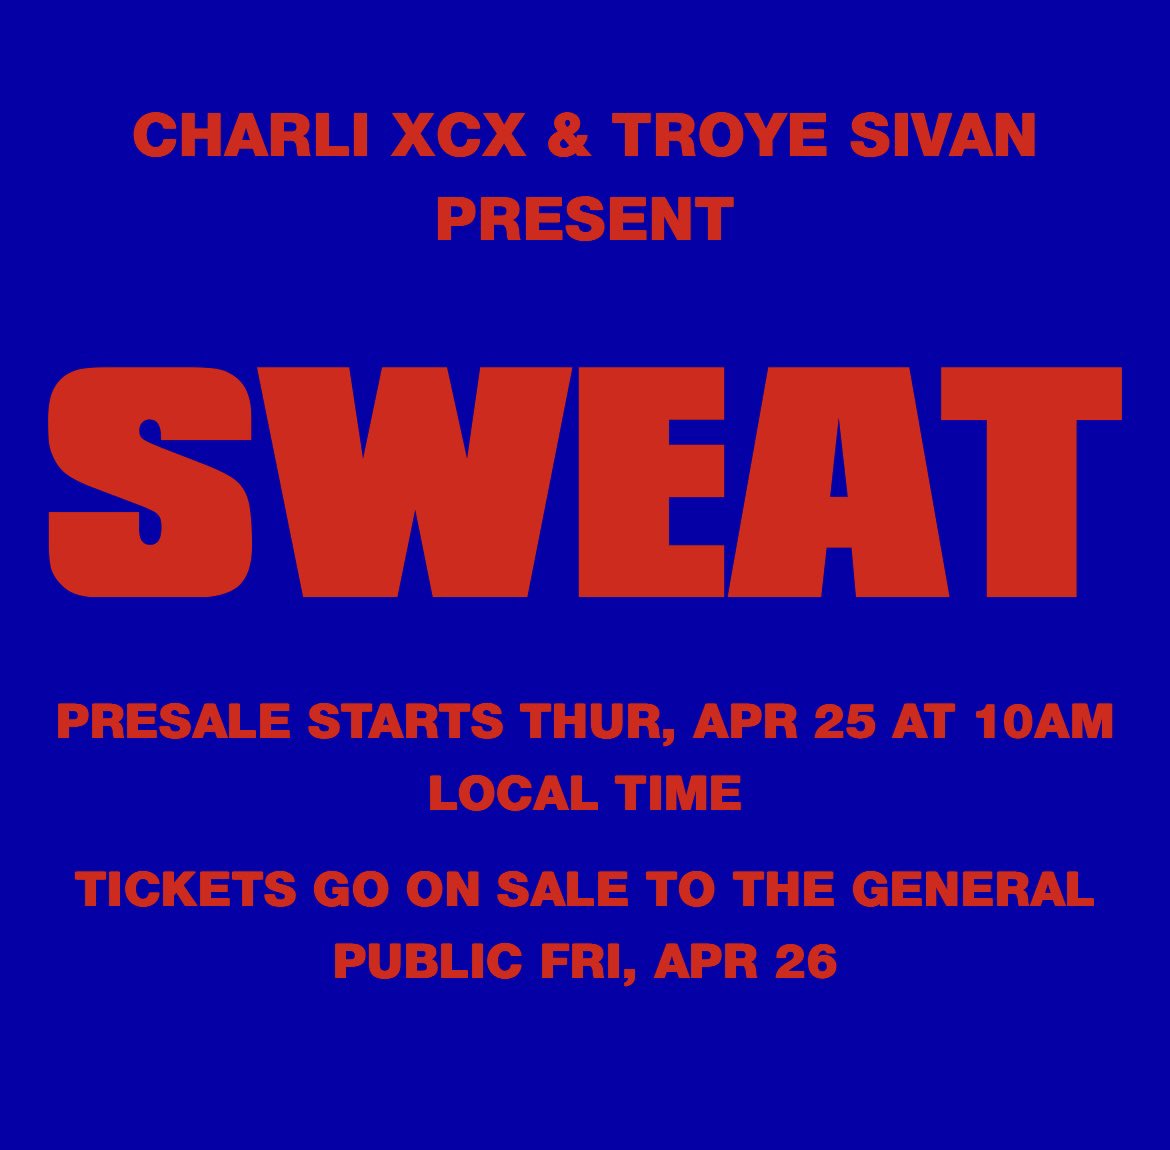 Charli XCX & Troye Sivan announce ‘SWEAT’ tour with special guest Shygirl. 🔗: sweat-tour.com